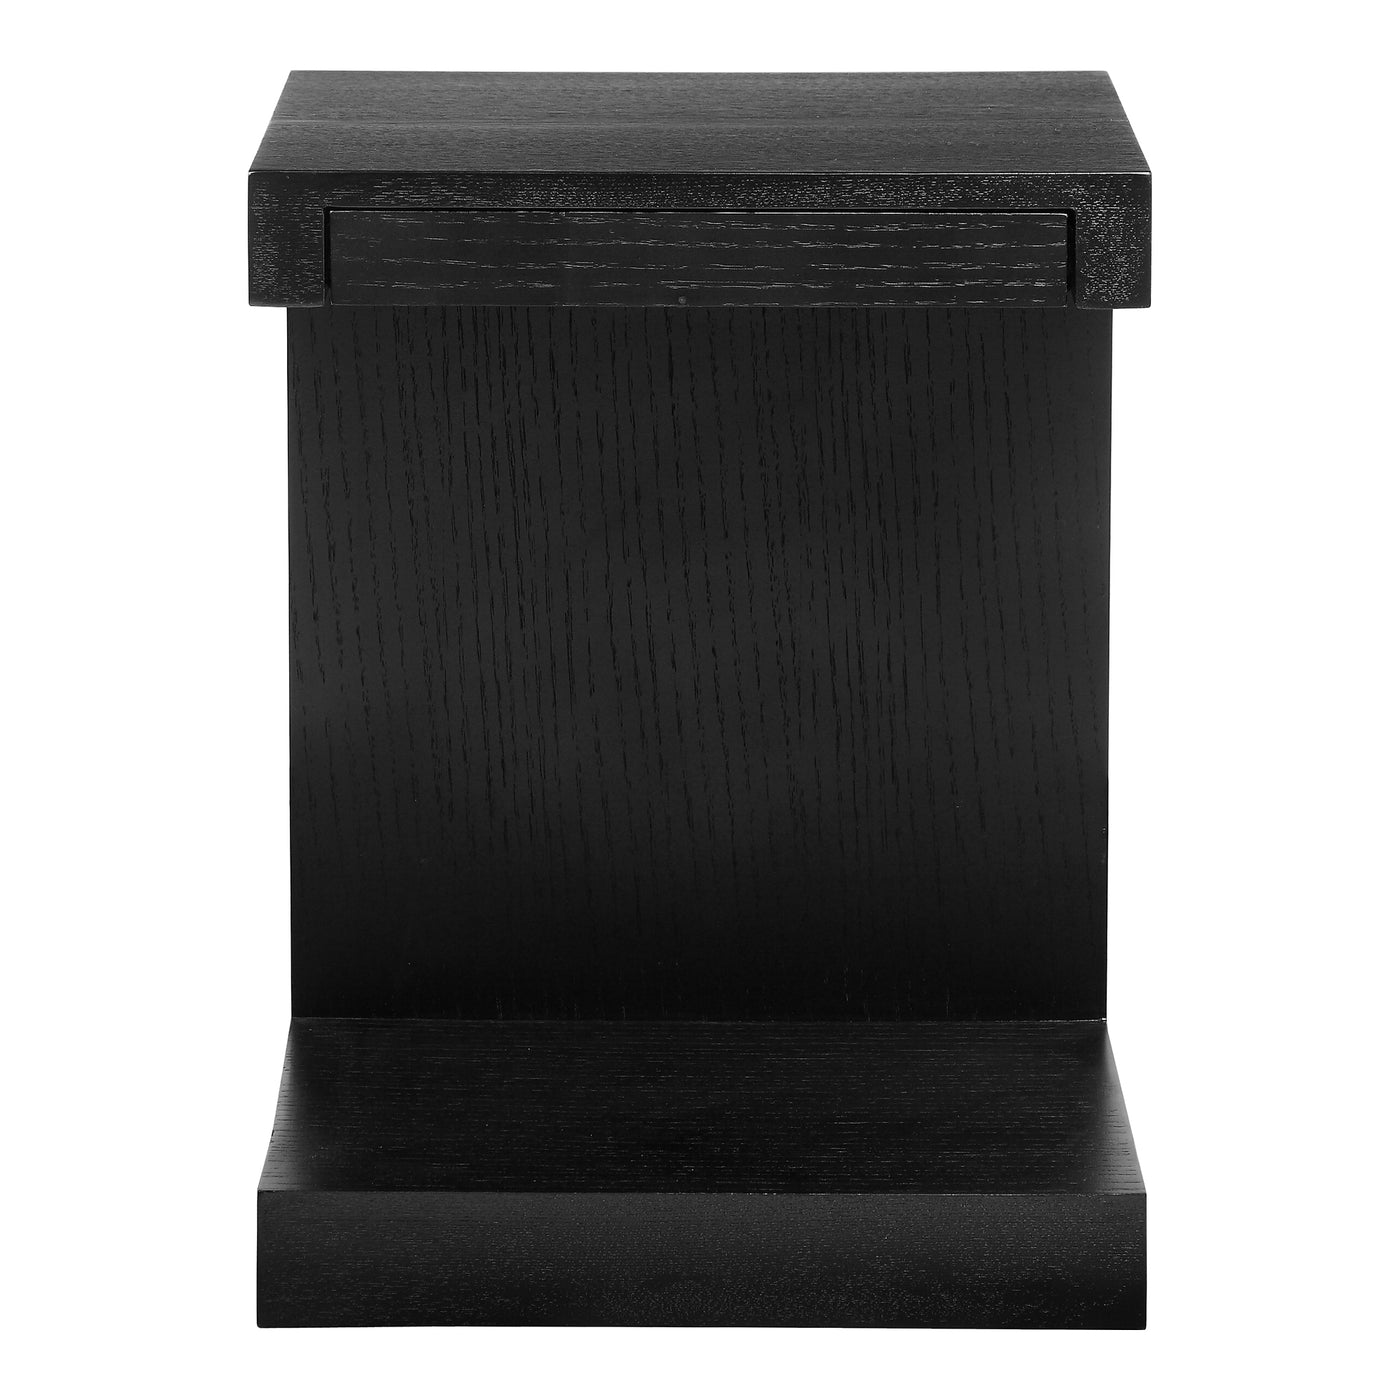 Zio boasts function, style, and versatility all in one end table. With clean, contemporary lines and simple design in soli...